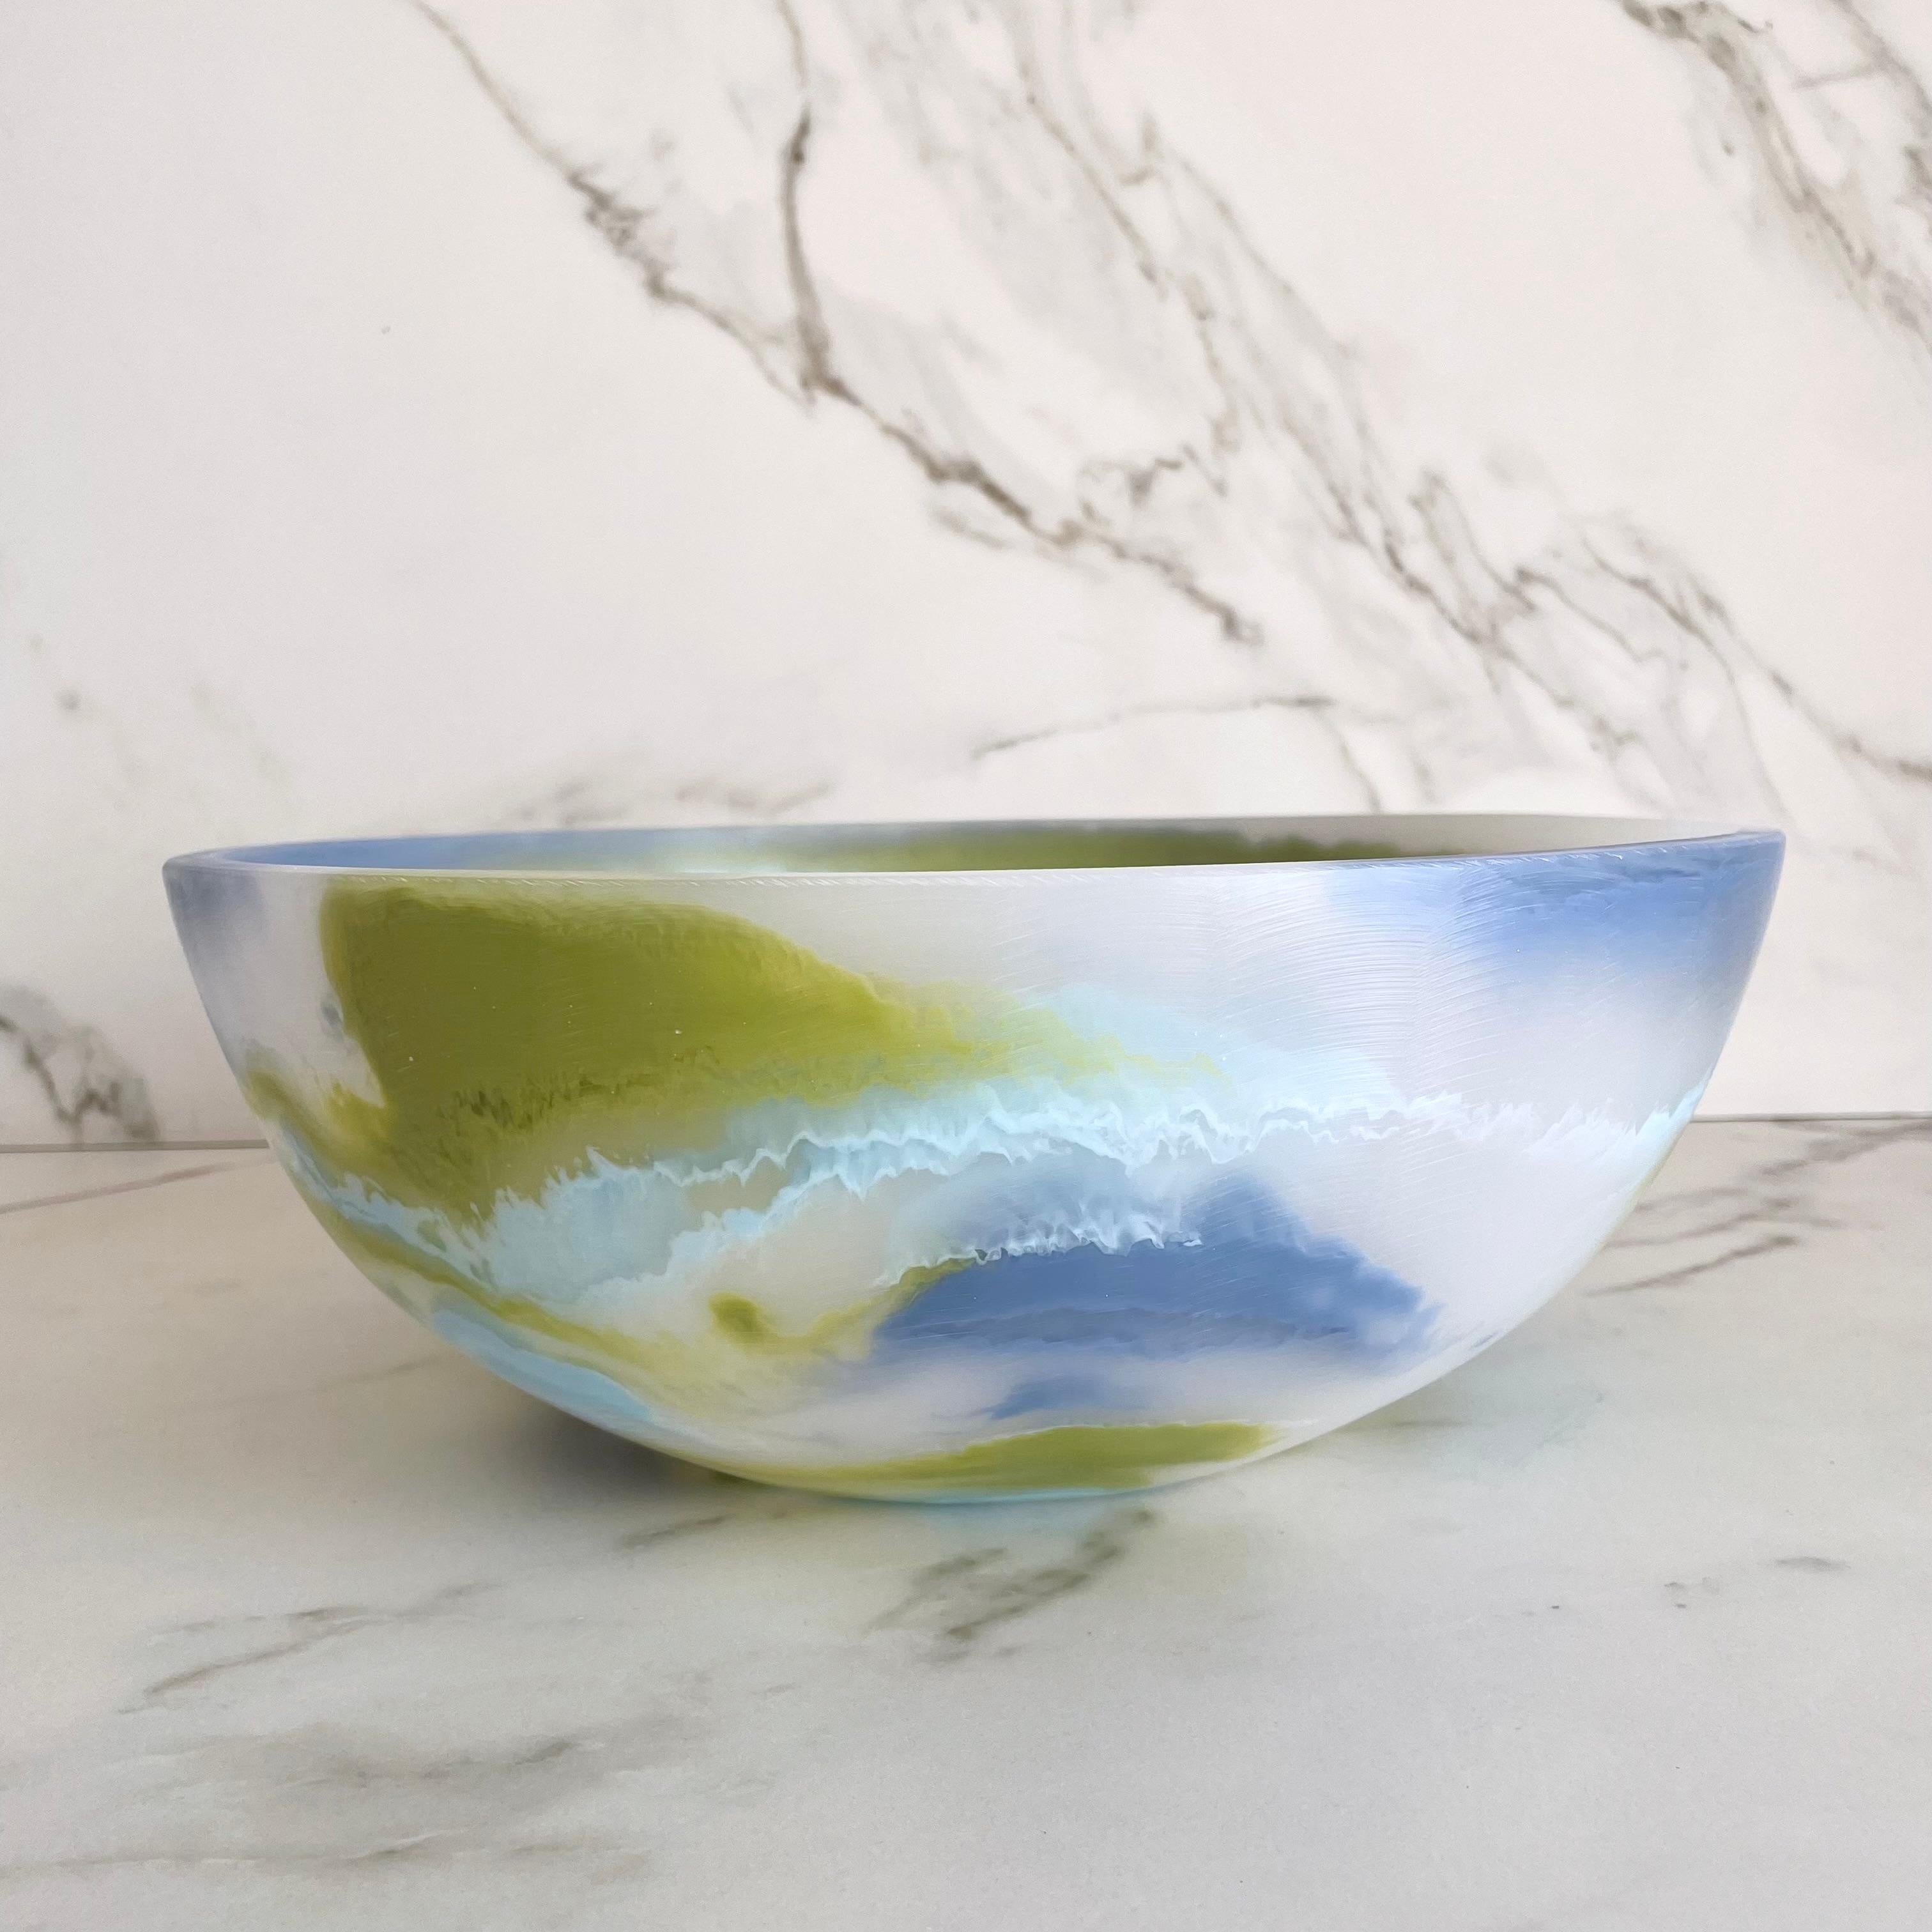 Our colorful bowl is handmade in traslucid white resin with marbled texture in lime green, light blue and cobalt blue. Its fun and colorful design makes it a statement piece and can be used as decor,fruit platter or to serve cold food.

Designed